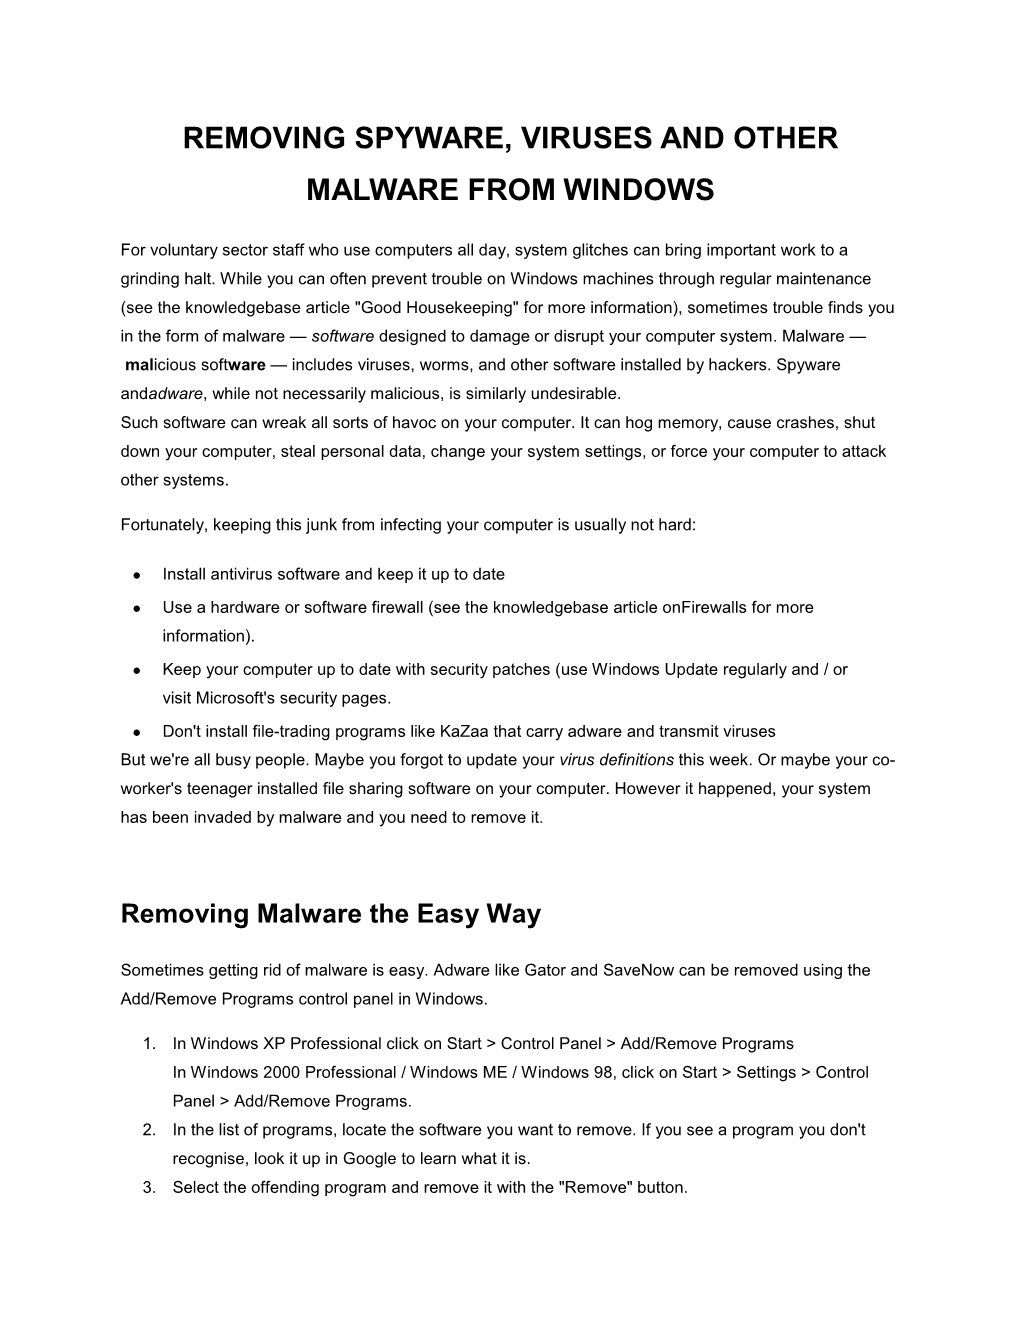 Removing Spyware, Viruses and Other Malware from Windows